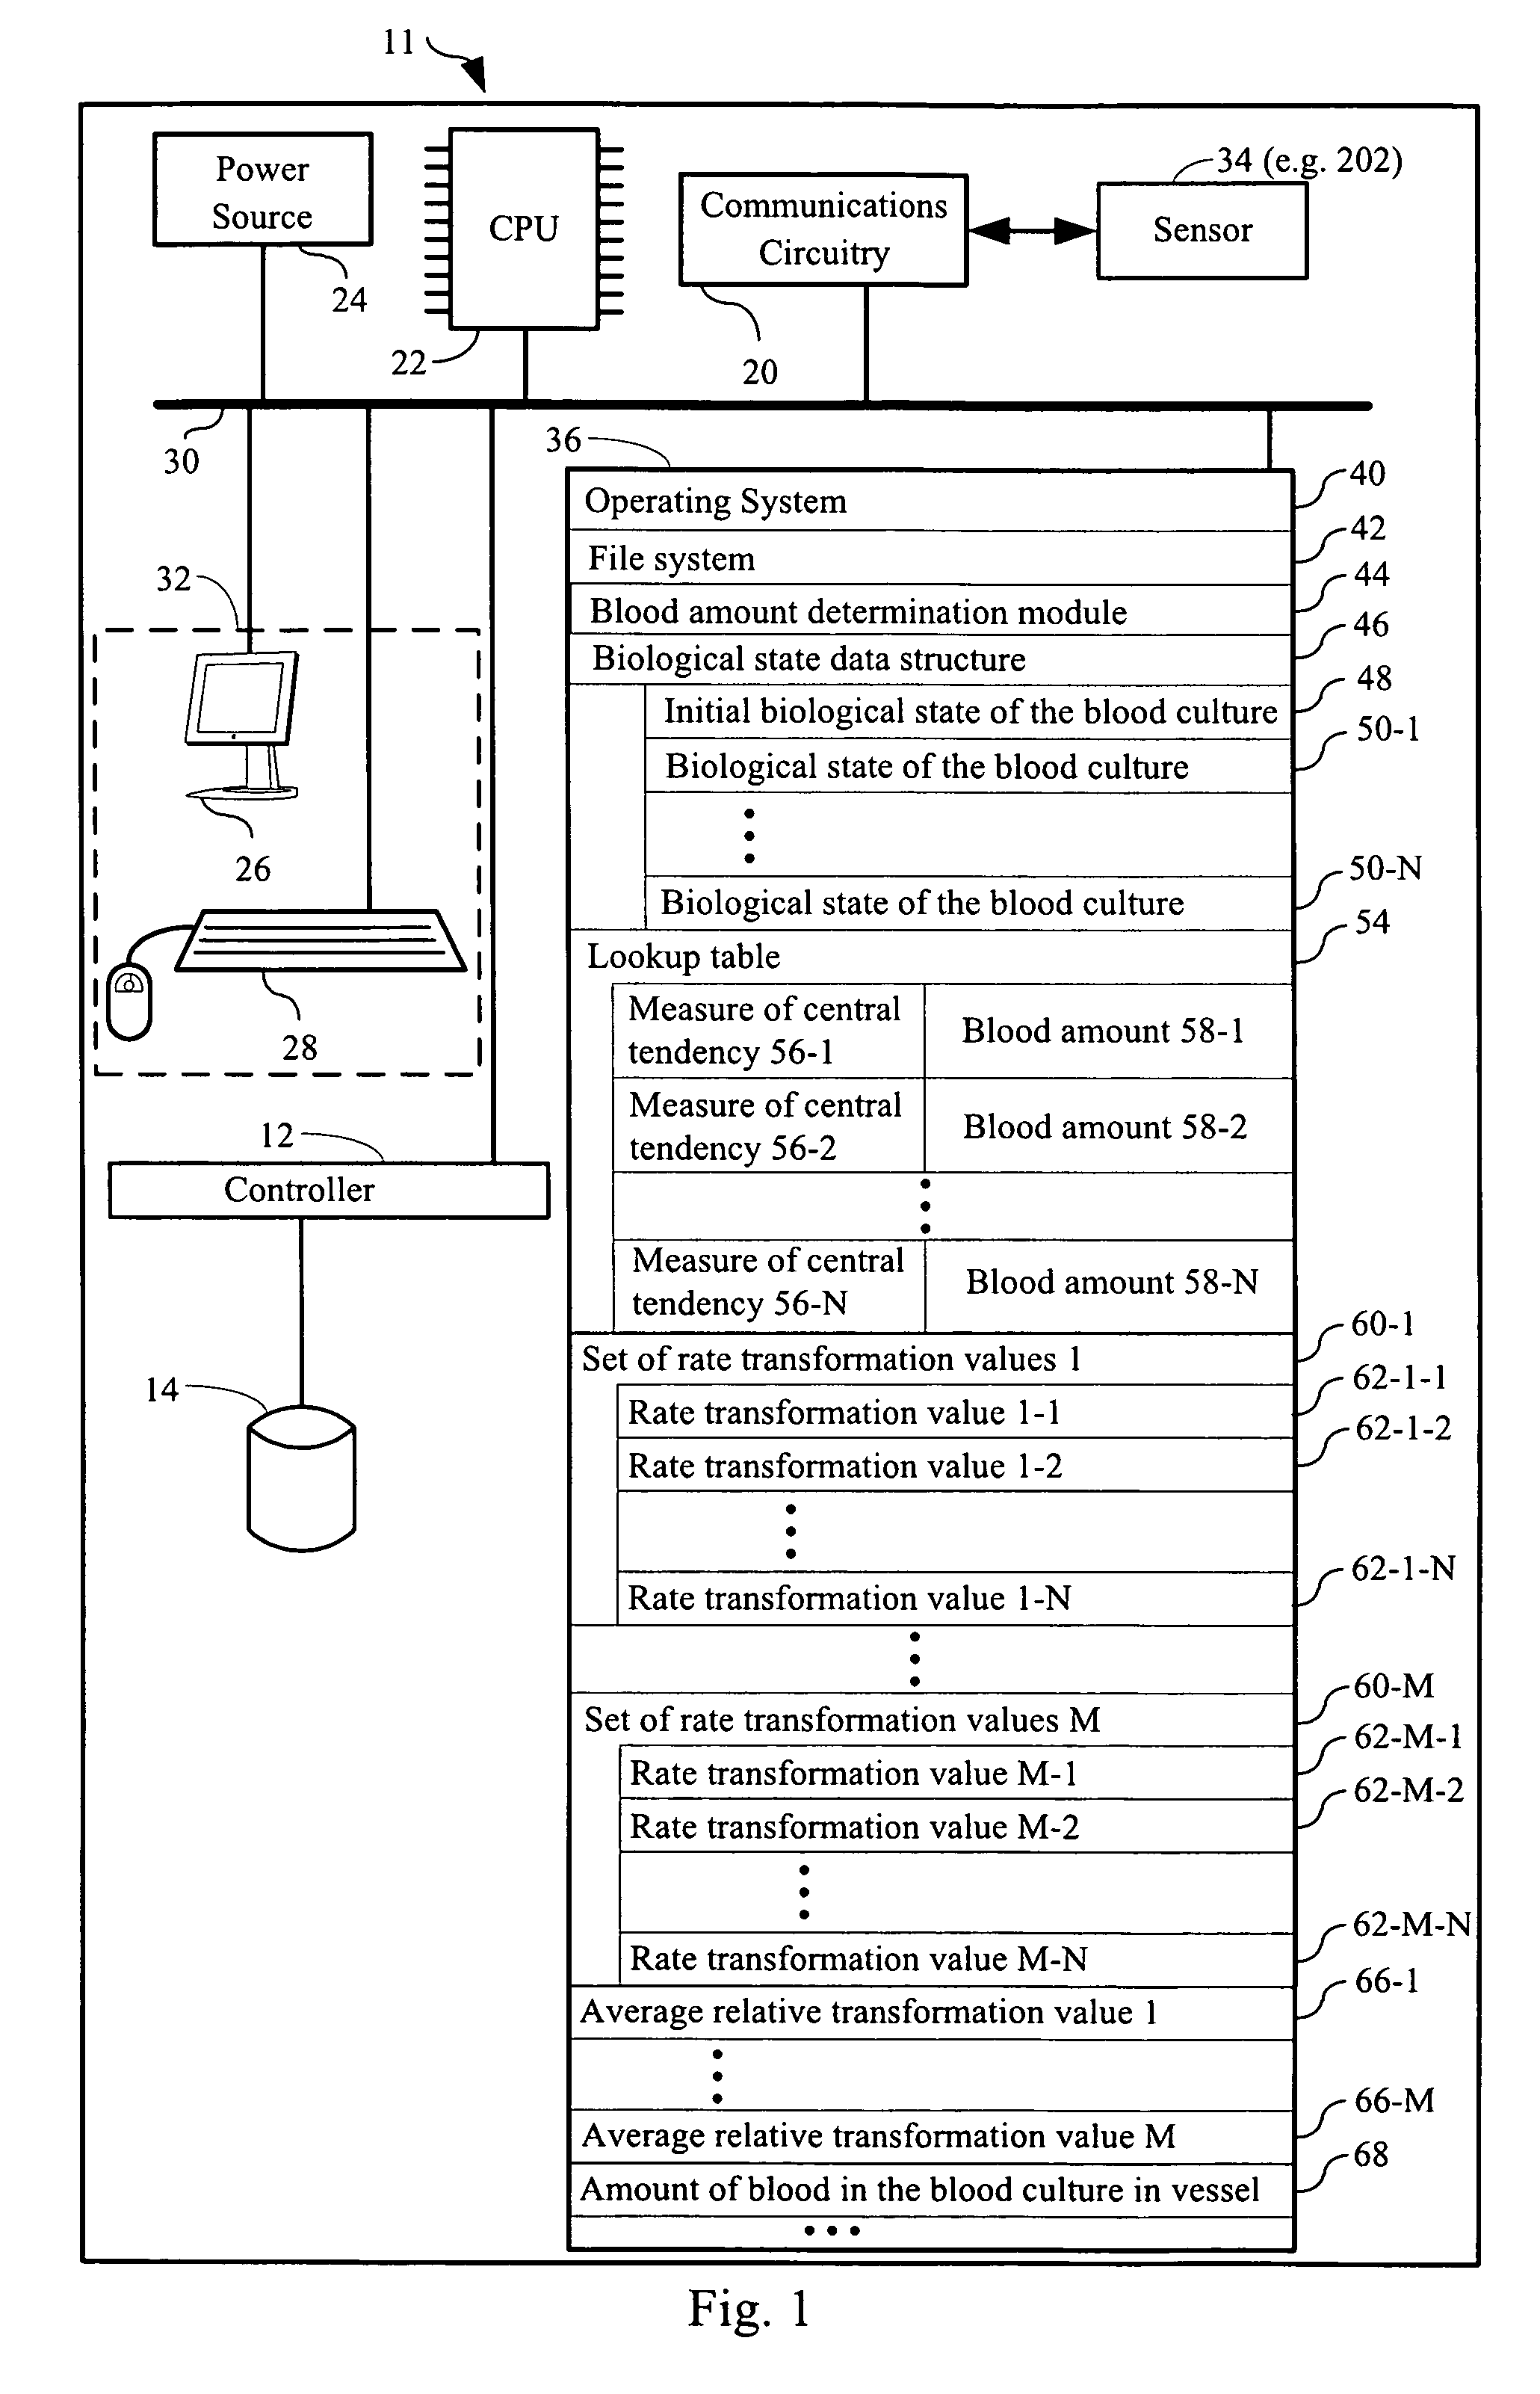 Determination of blood volume in a culture bottle